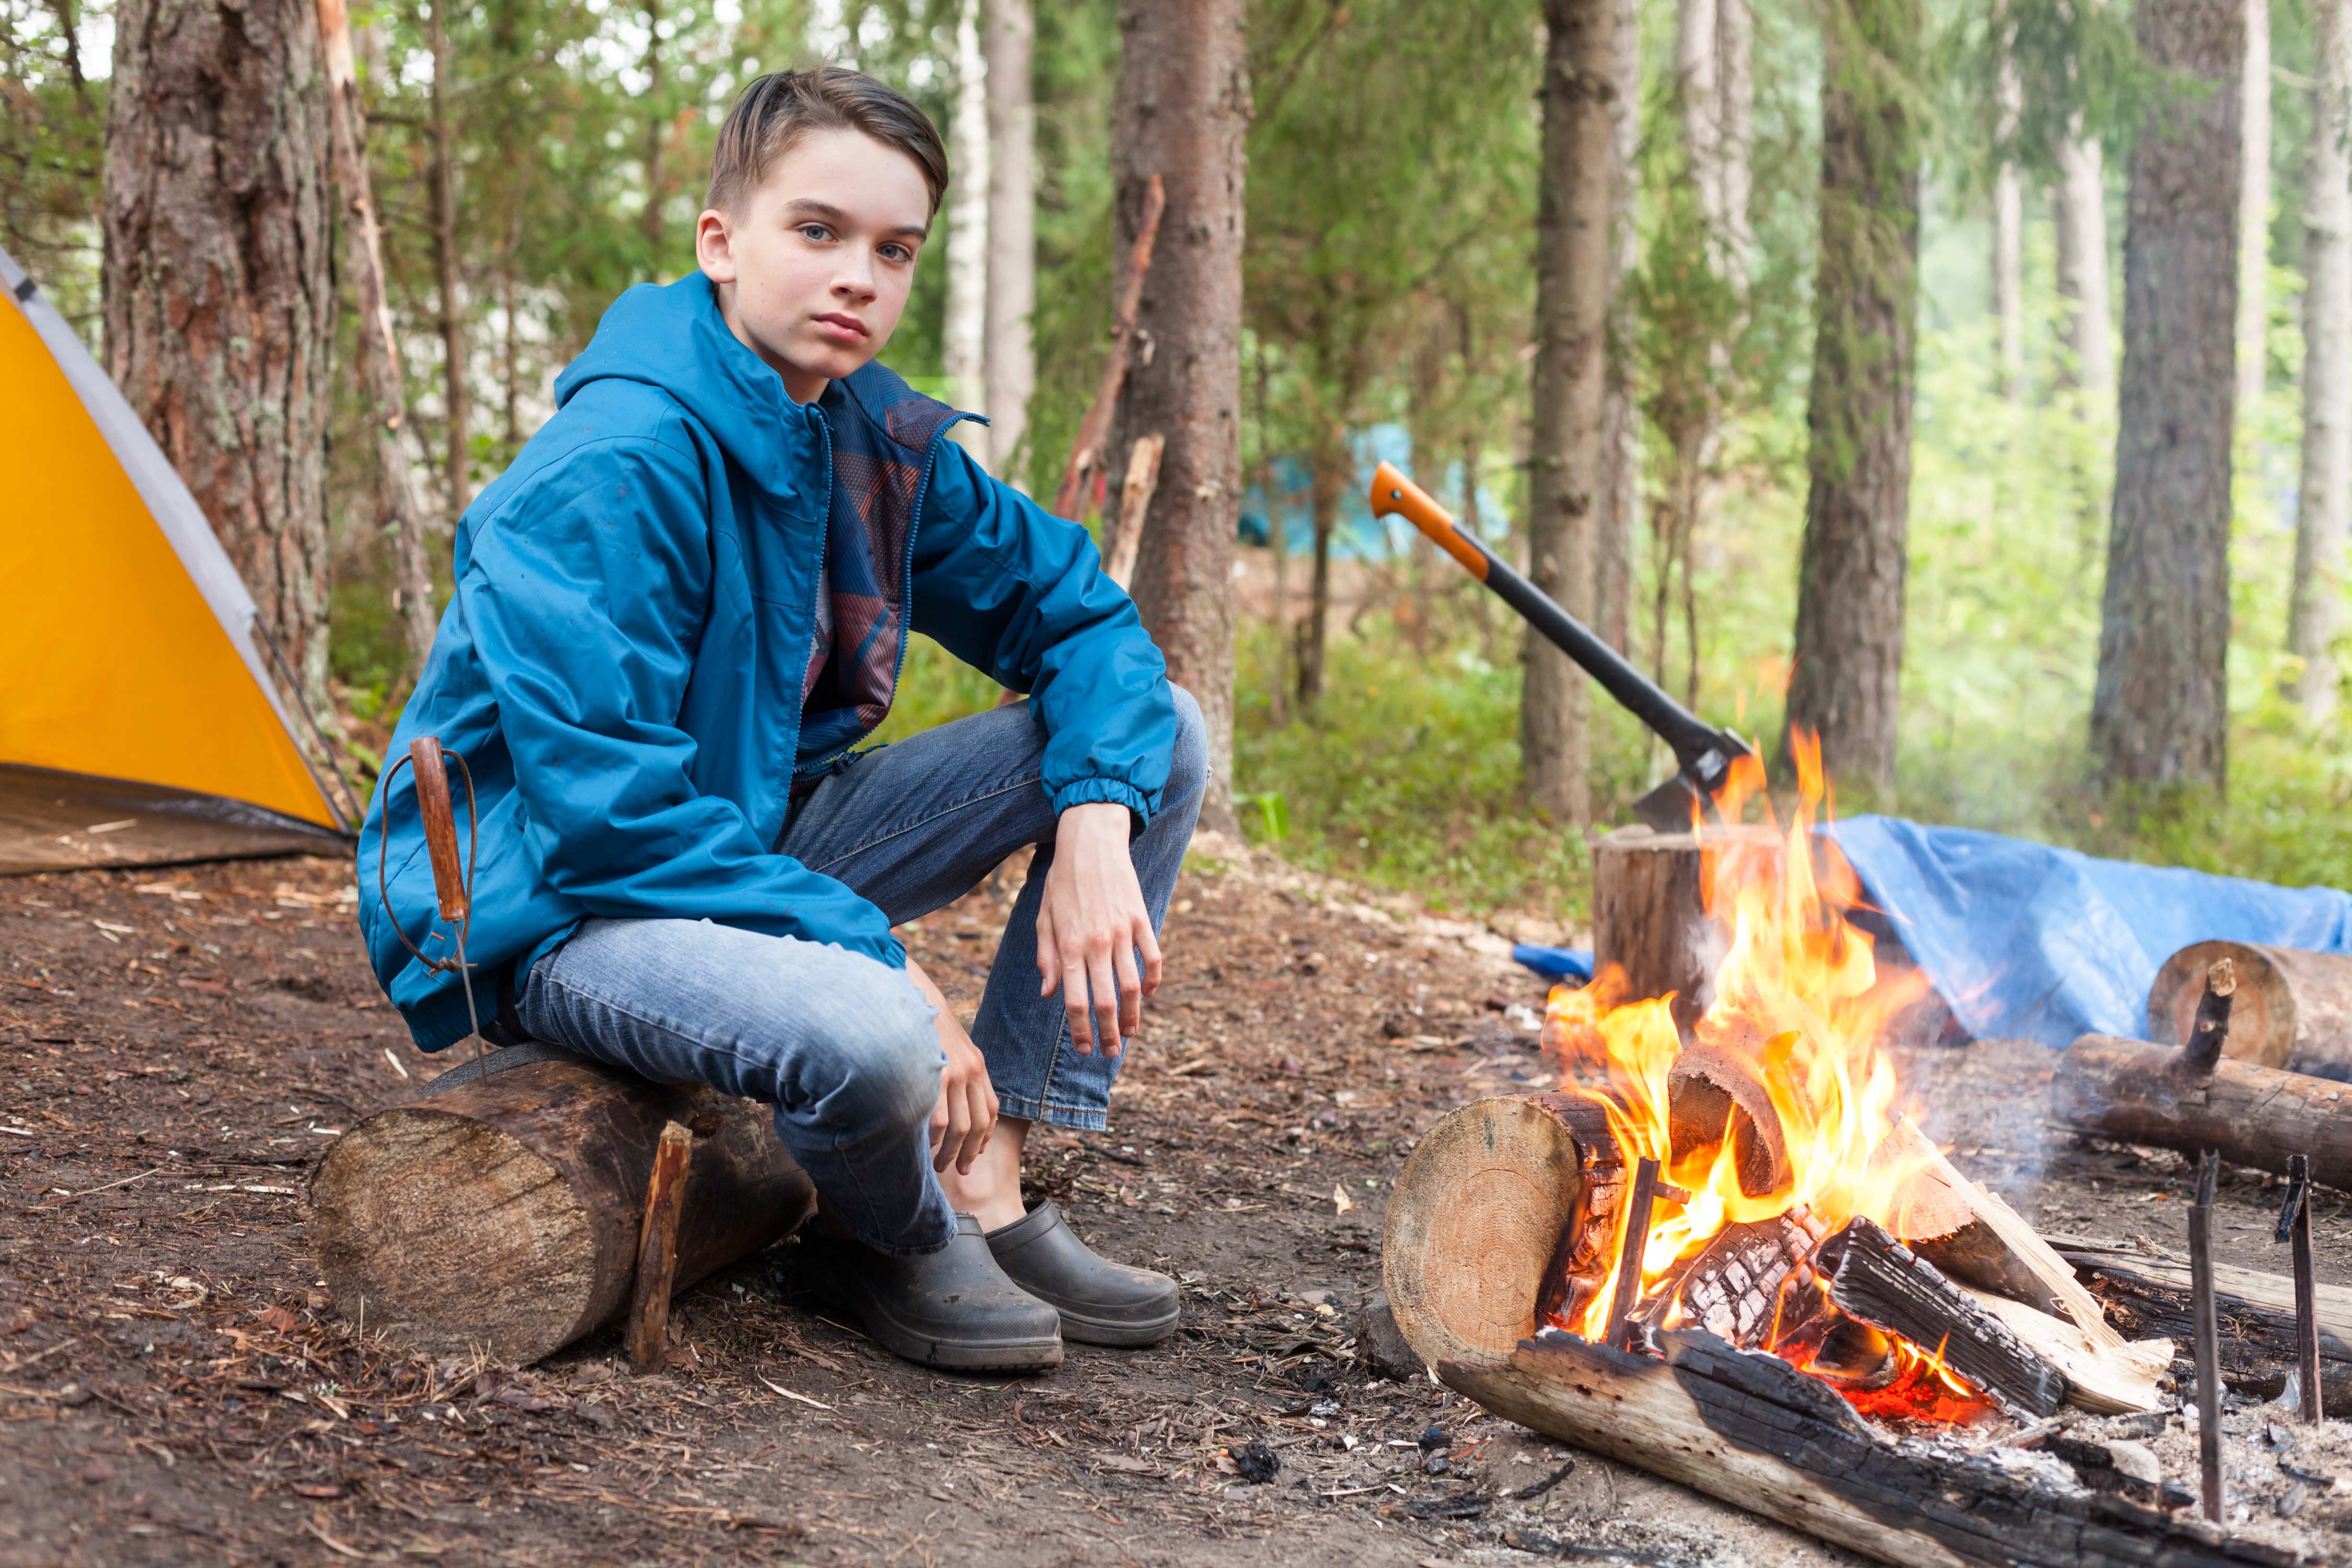 LISTEN: Would you let your 10-year-old go camping alone?